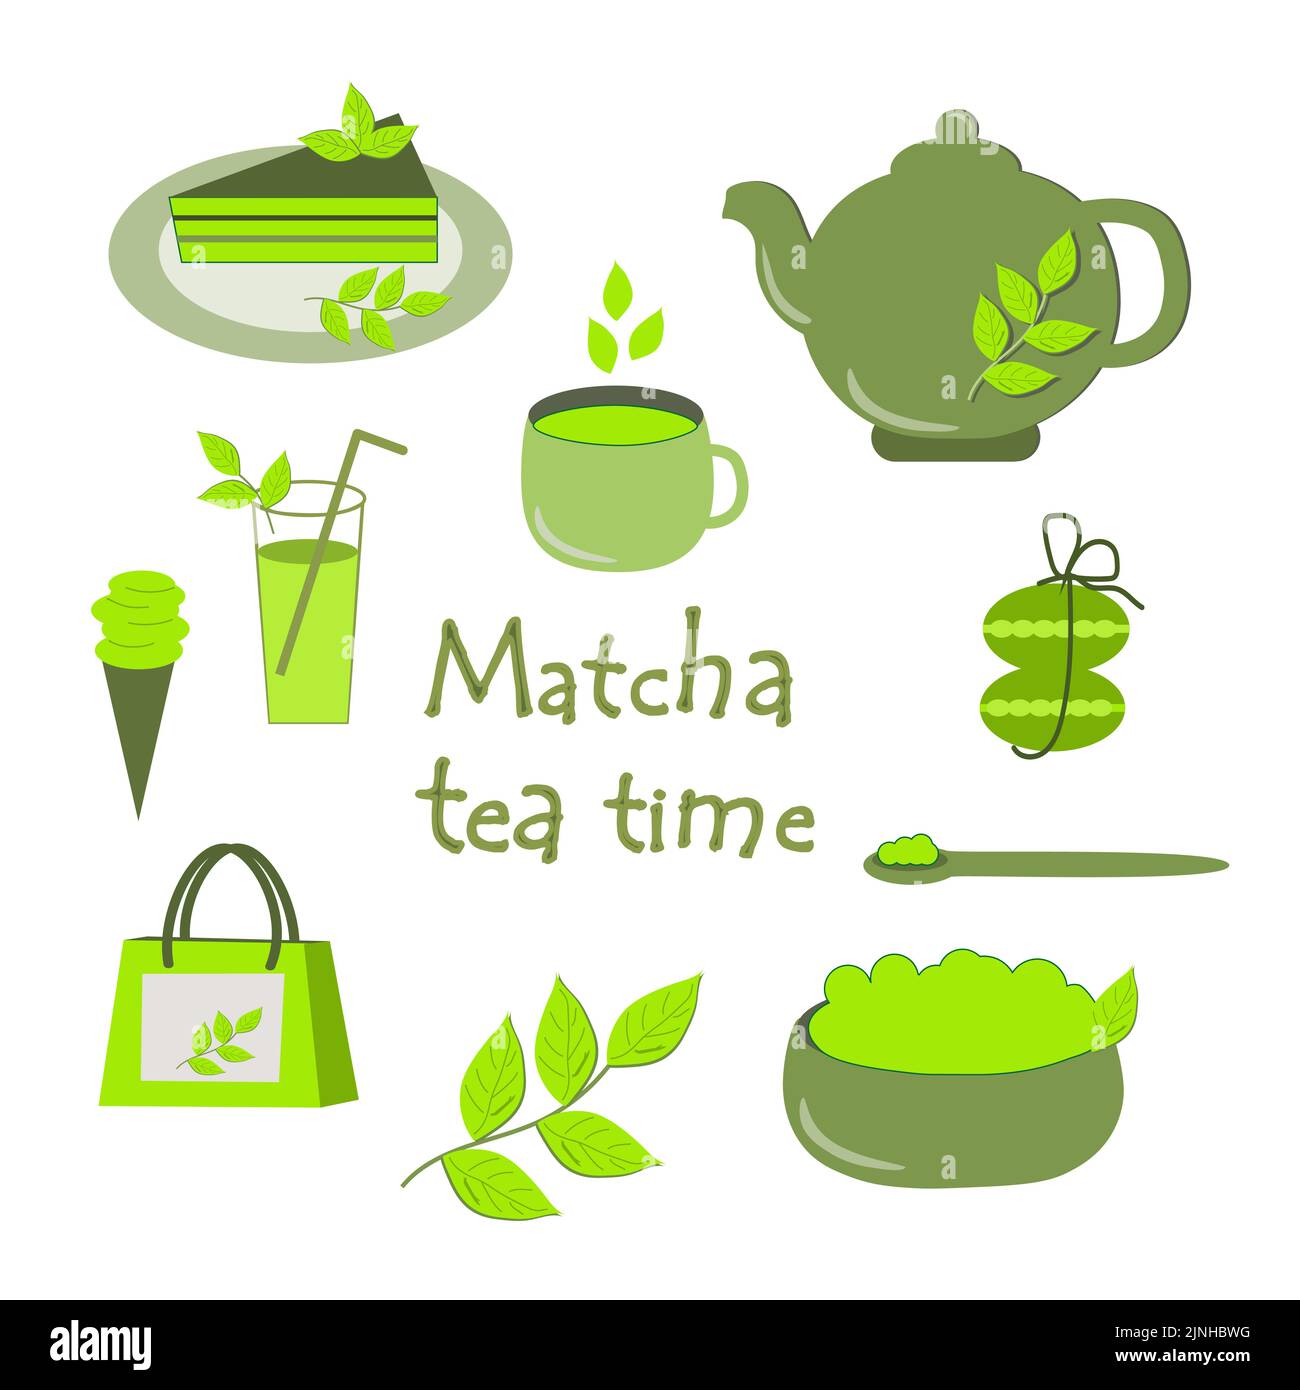 Matcha. Tea time. A green set that uses matcha, as well as drinks, pastries, matcha leaf packaging. Vector illustration. Stock Vector